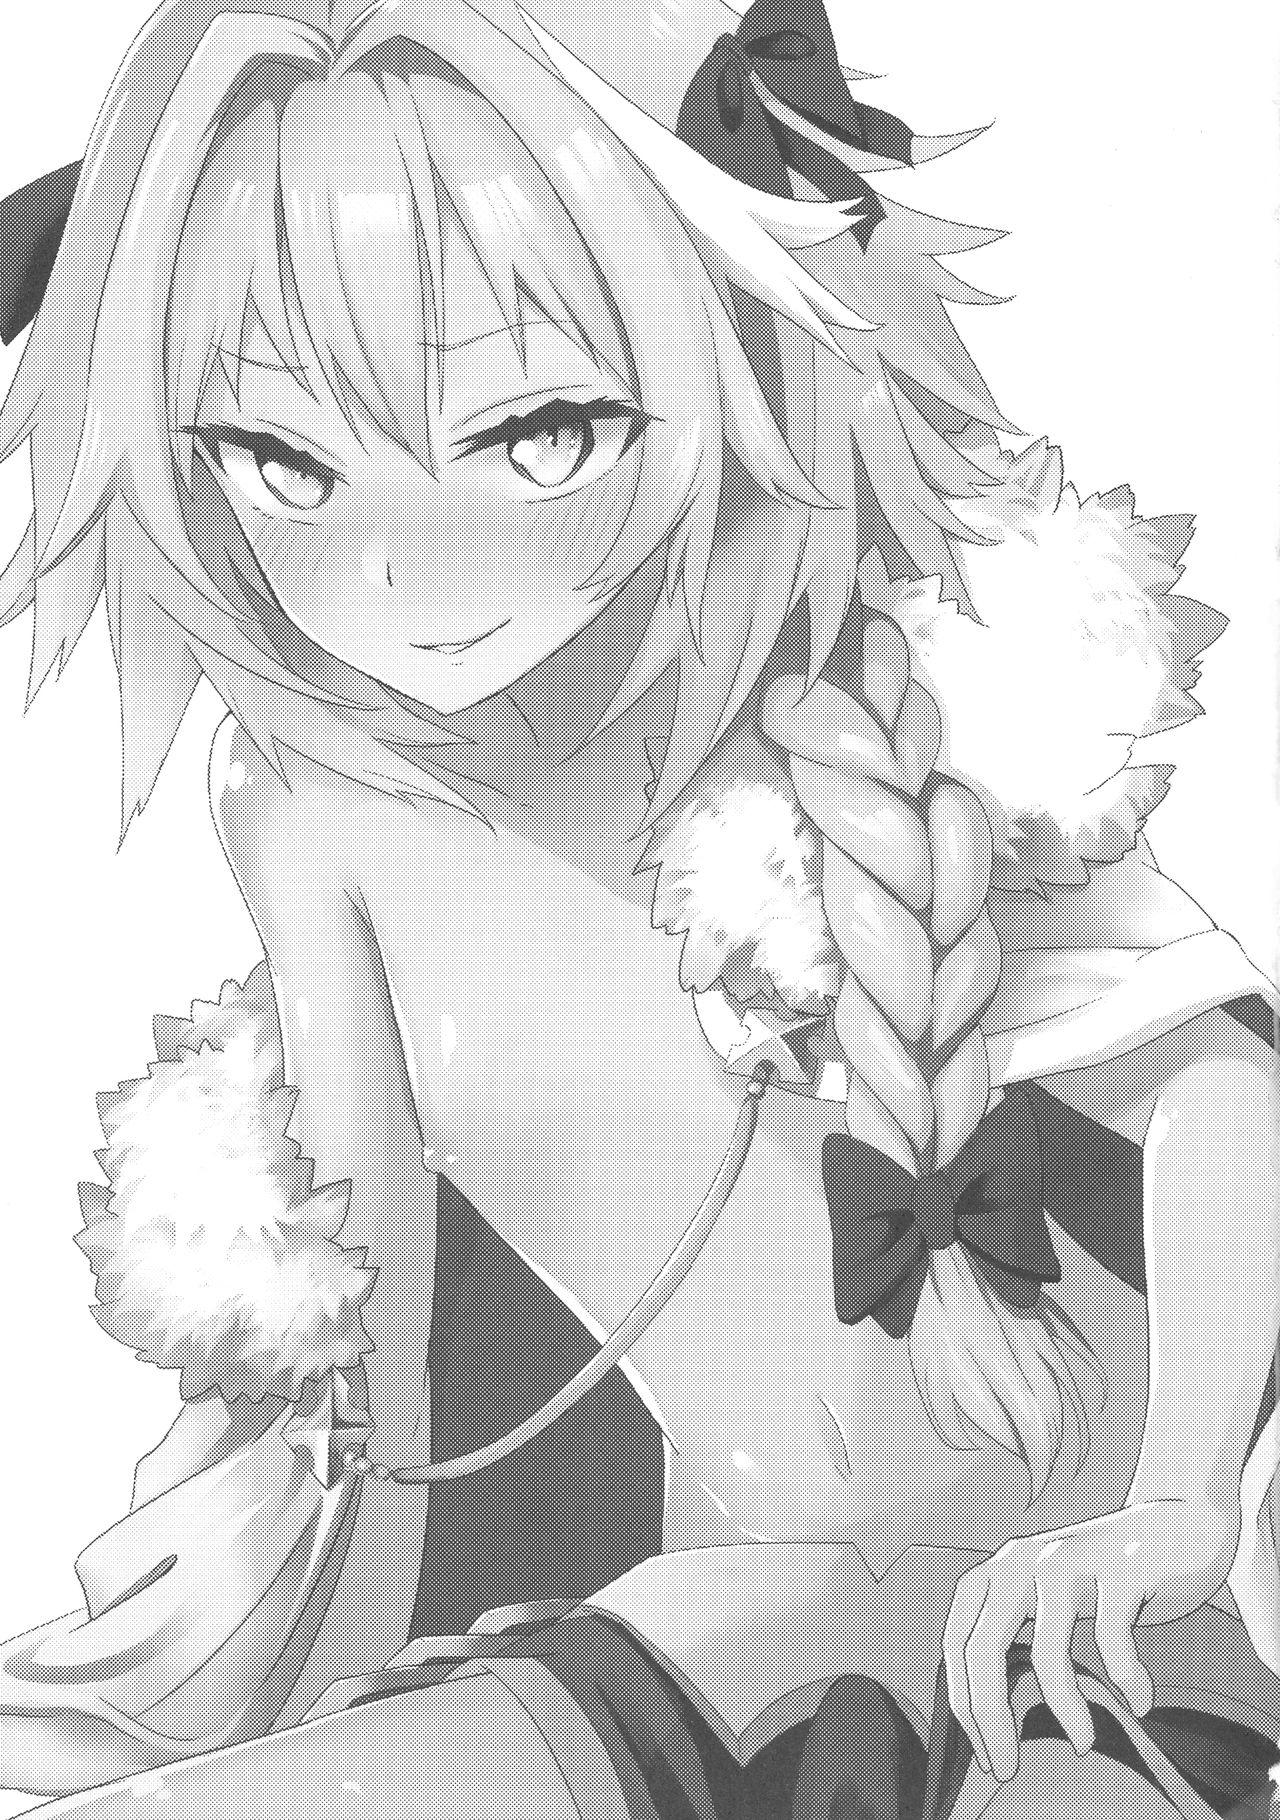 Shemale Astolfo to Yoru no Chaldea - Fate grand order Shemales - Page 3